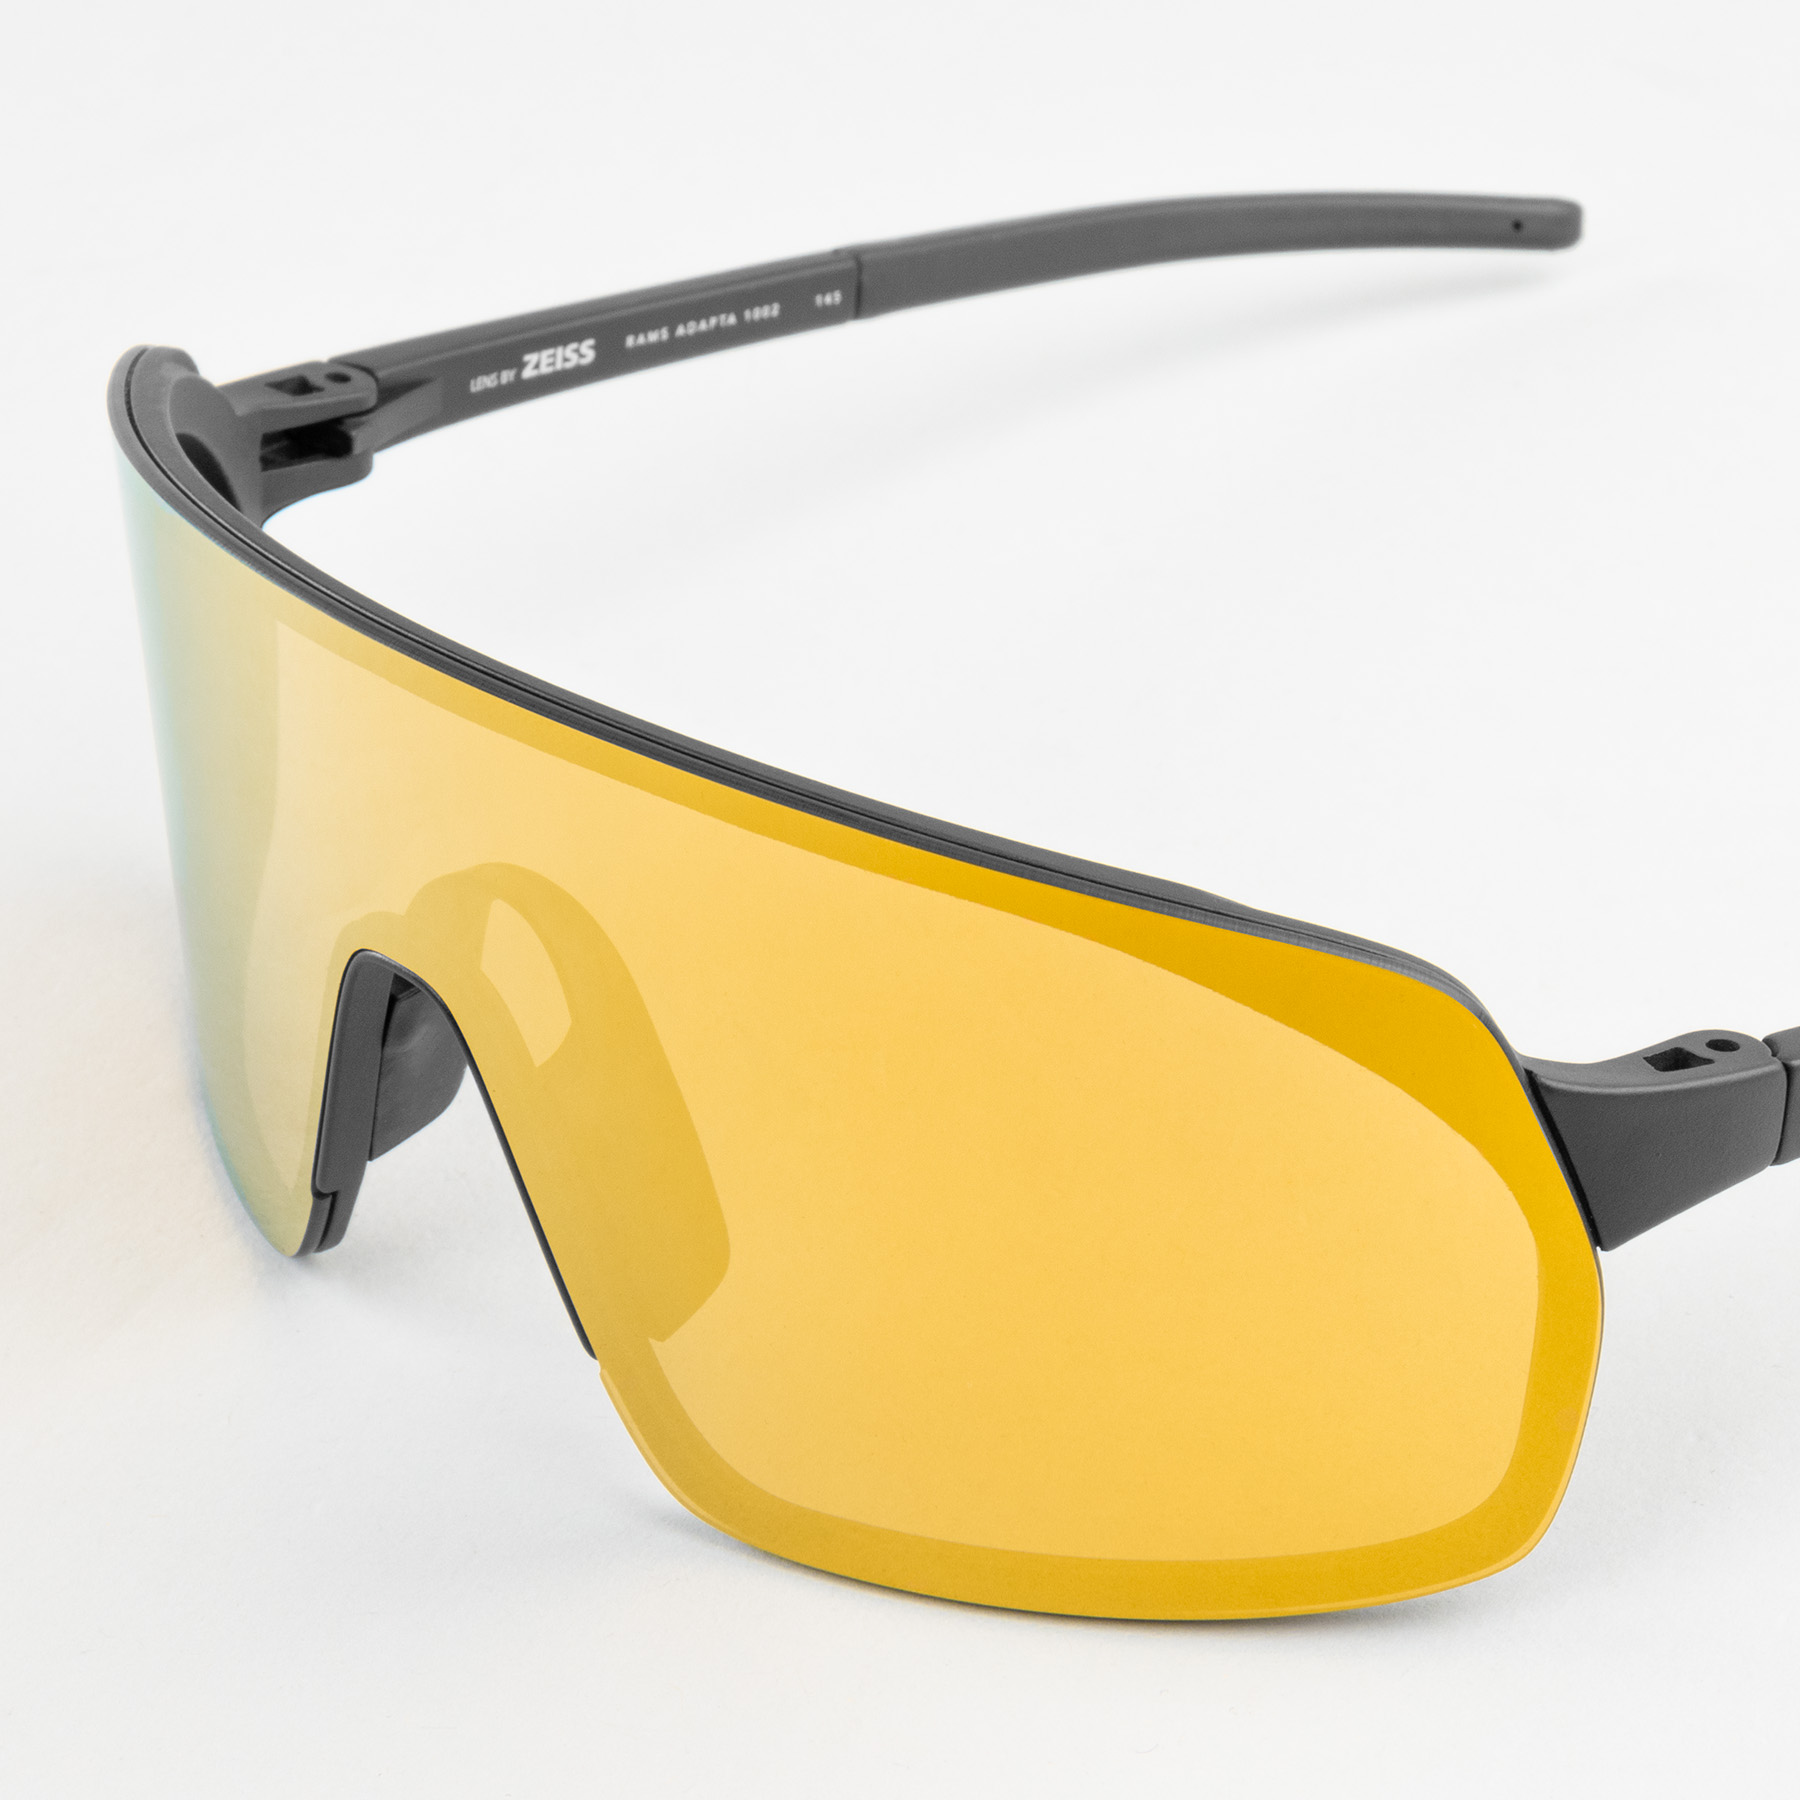 Sports sunglasses OUT OF Rams Gold on the white background, view slightly from the side and up